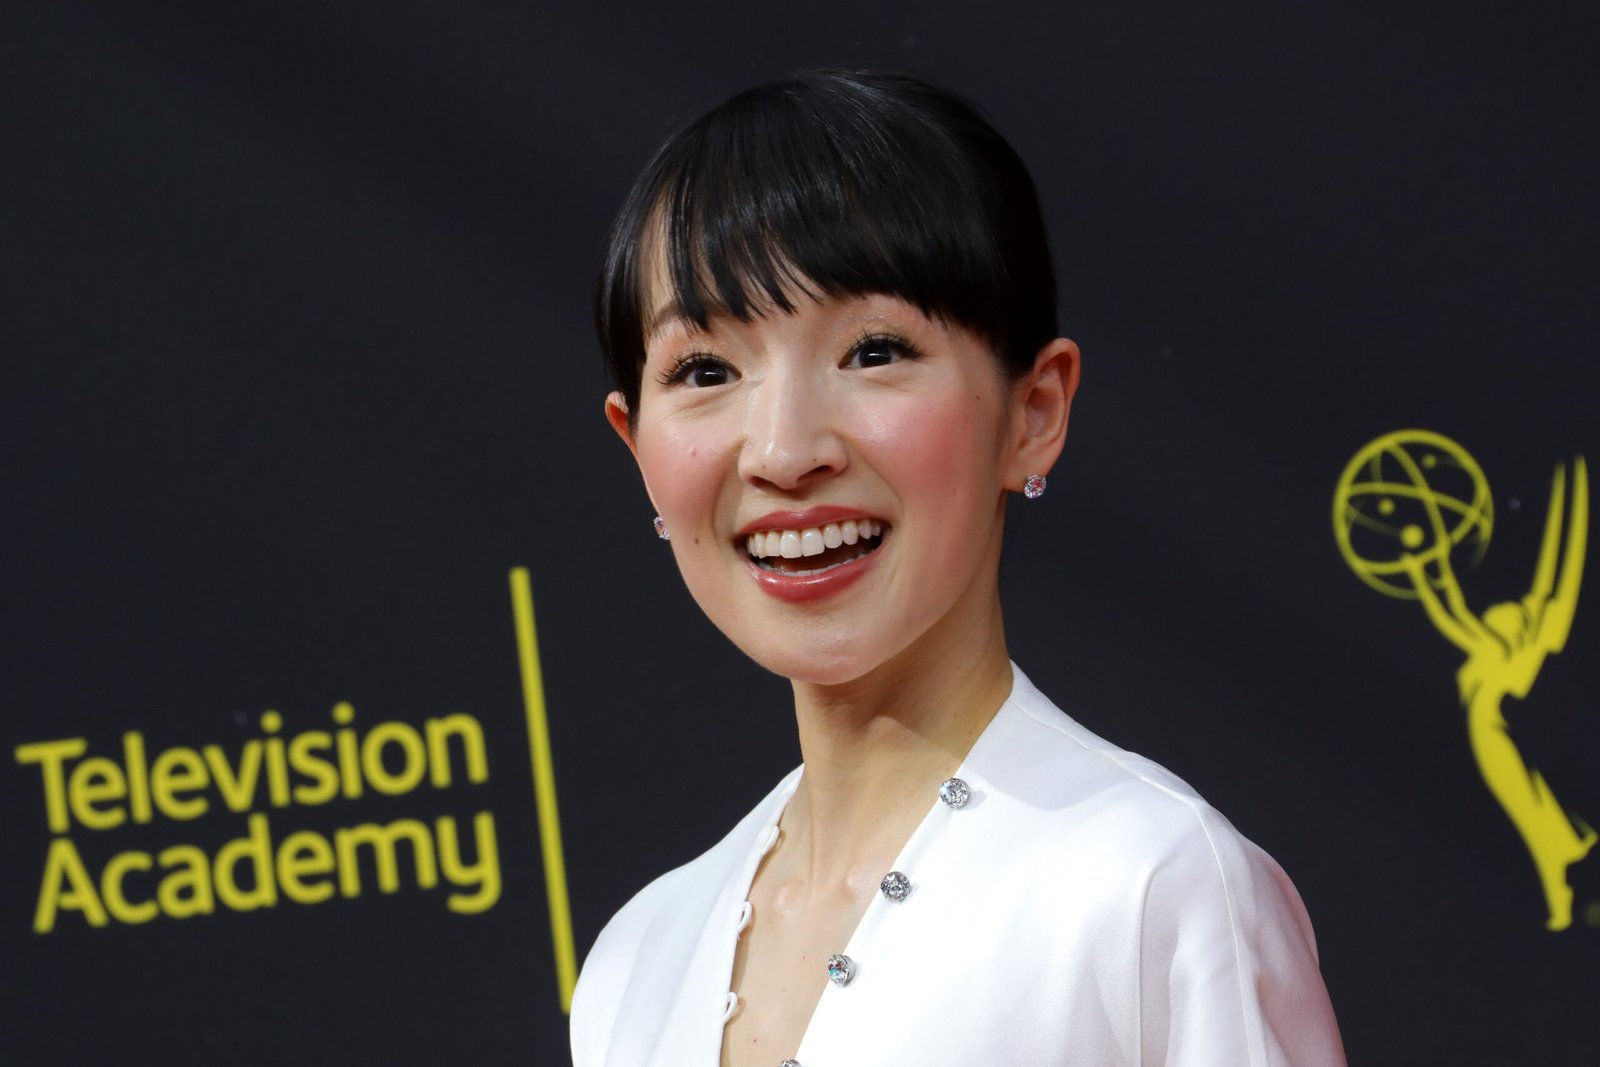 Marie Kondo Has ‘Sort of Given Up’ On Preserving Her Home Clean After Three Formative years